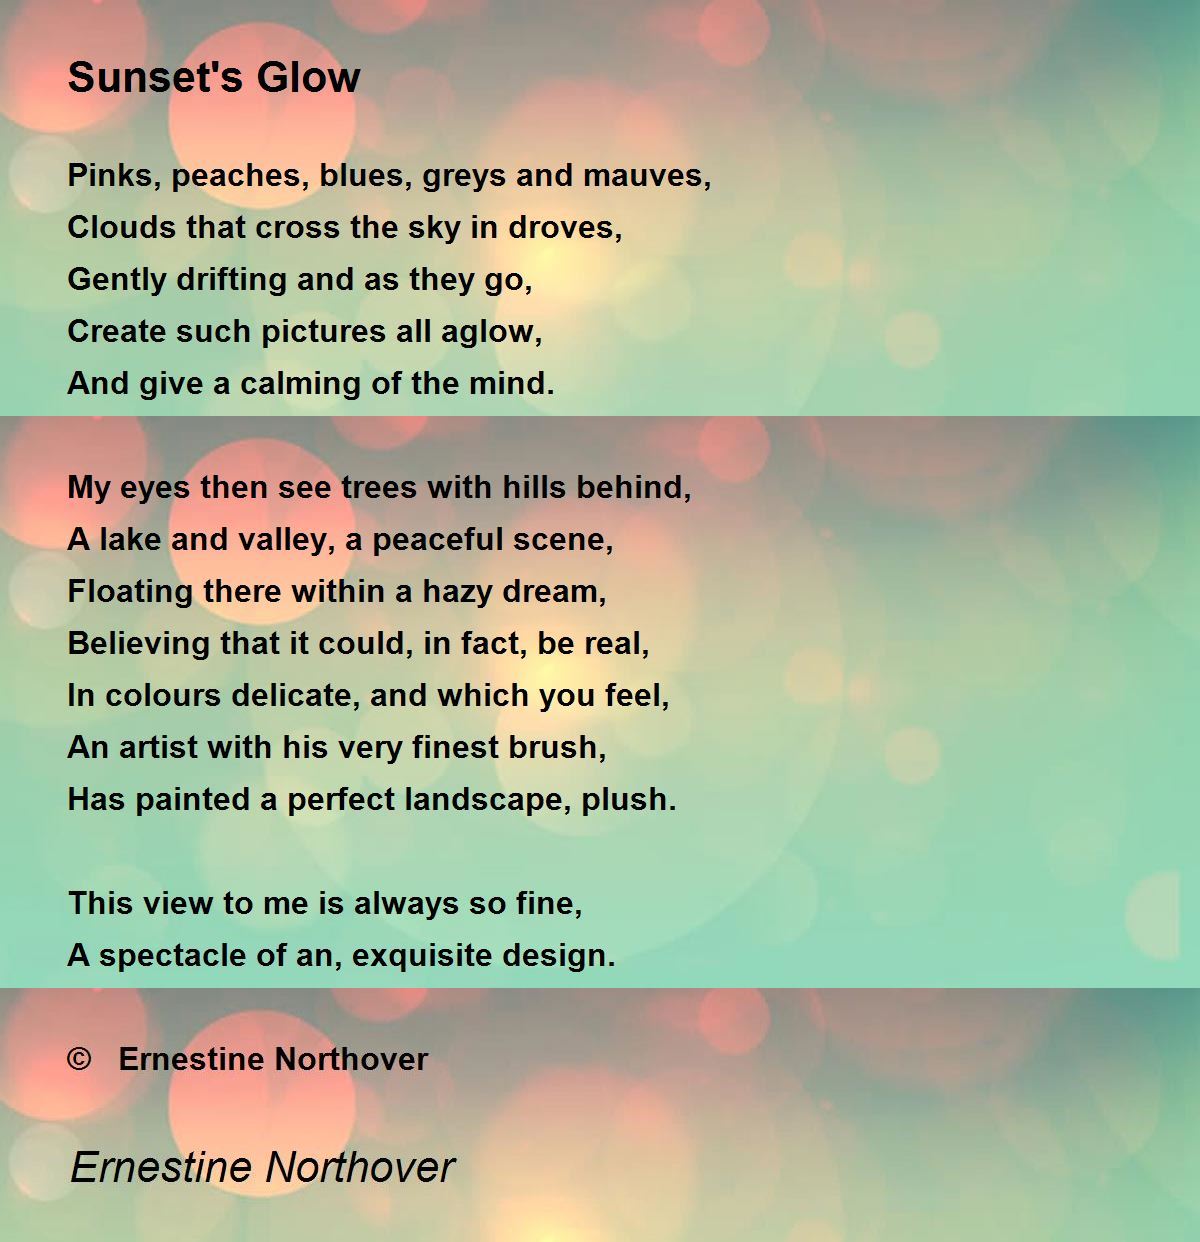 Sunset's Glow - Sunset's Glow Poem by Ernestine Northover